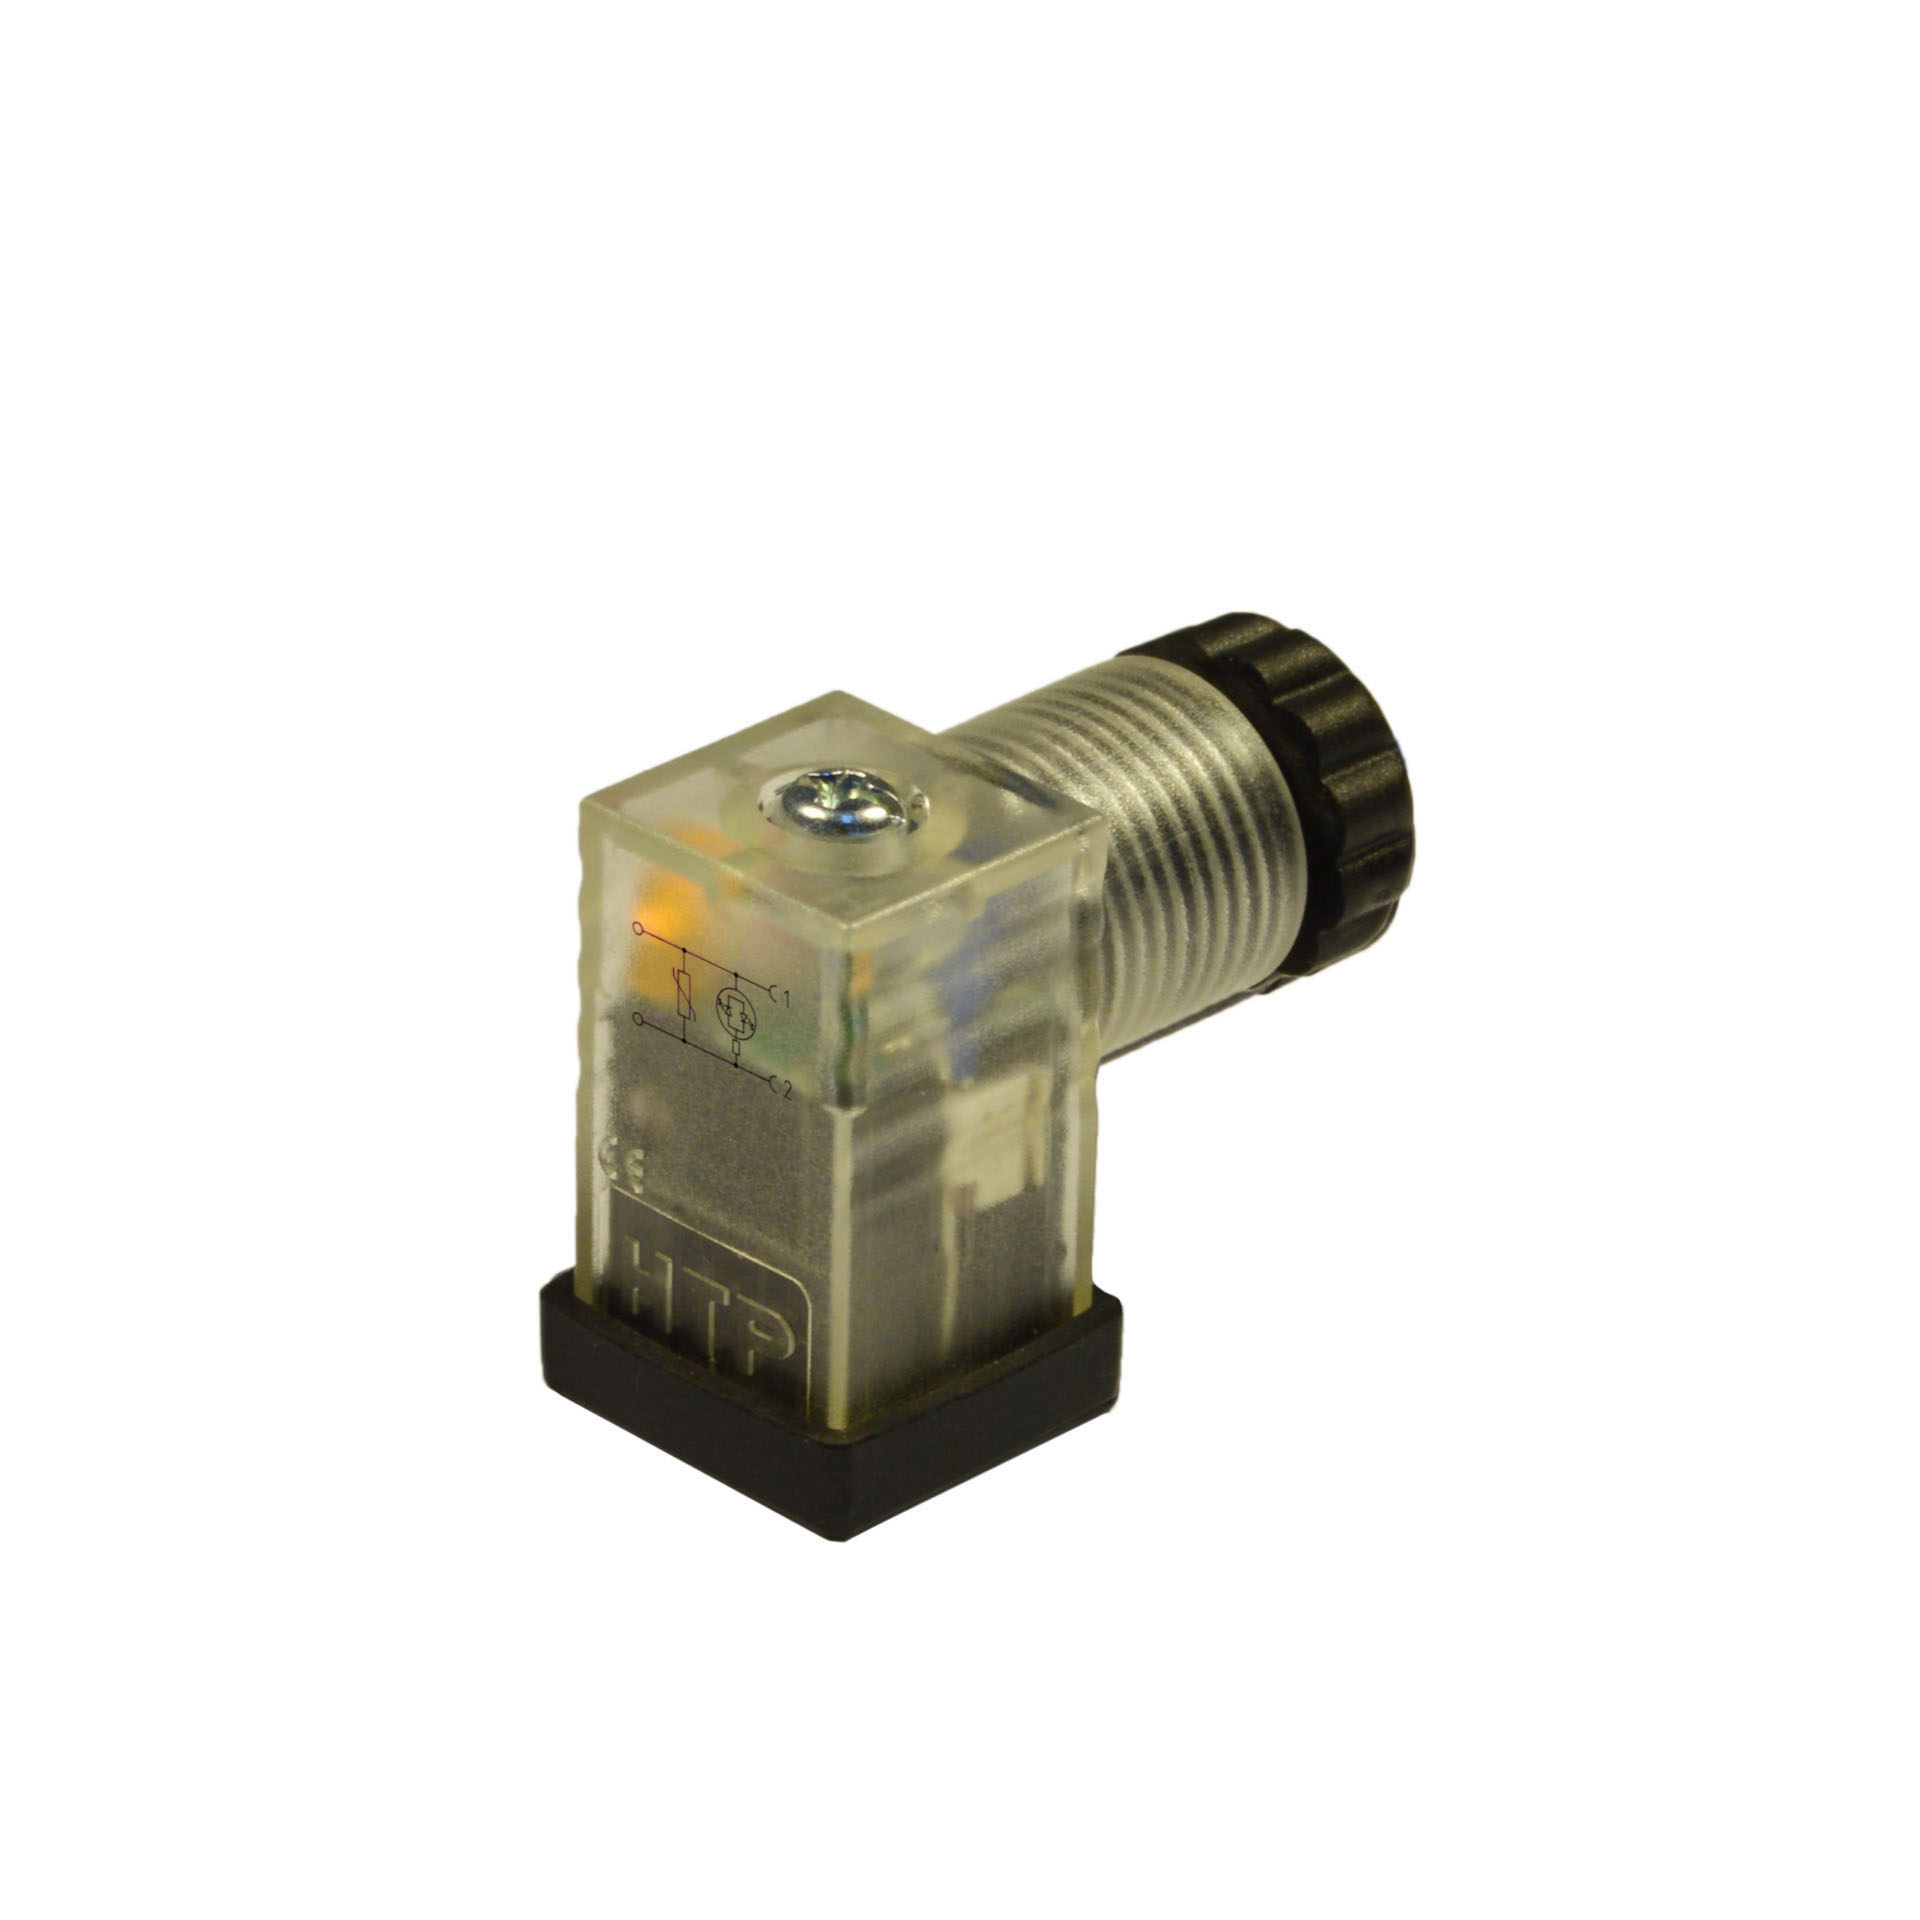 Industrial standard(typeC)field attachable,2p+PE(h.6),yellow LED+vdr,24VAC/DC,PG7